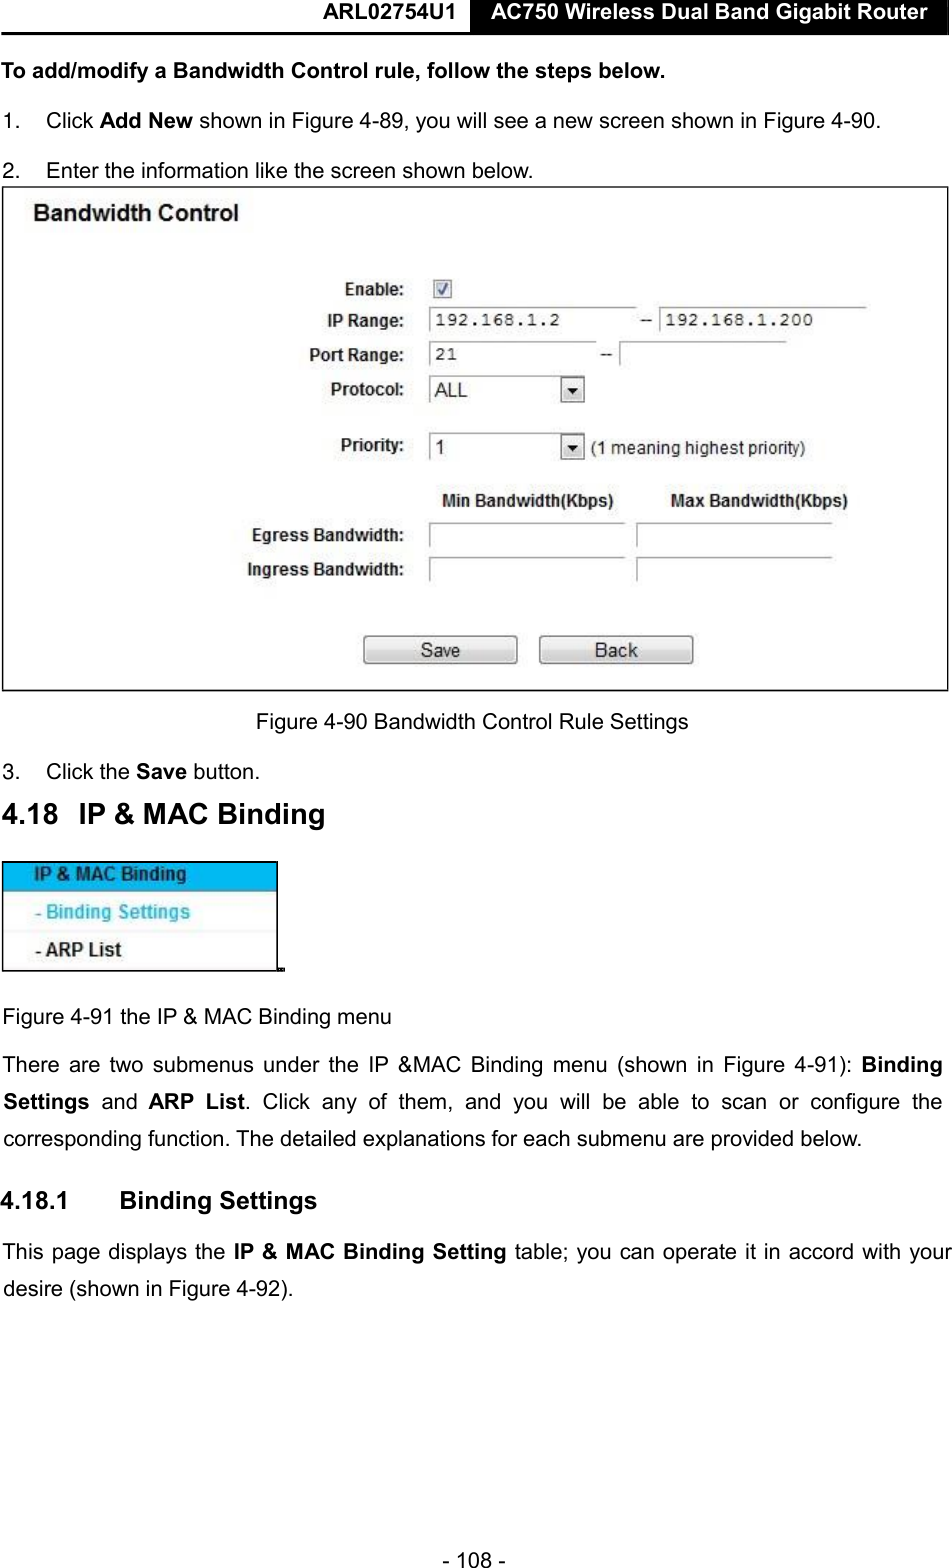  ARL02754U1  AC750 Wireless Dual Band Gigabit Router    - 108 -  To add/modify a Bandwidth Control rule, follow the steps below.  1. Click Add New shown in Figure 4-89, you will see a new screen shown in Figure 4-90.  2. Enter the information like the screen shown below.   3. Click the Save button.   Figure 4-91 the IP &amp; MAC Binding menu  There are two submenus under  the IP &amp;MAC Binding menu (shown in Figure  4-91):  Binding Settings  and  ARP  List.  Click  any  of  them,  and  you  will  be  able  to  scan  or  configure  the corresponding function. The detailed explanations for each submenu are provided below.  4.18.1  Binding Settings  This page displays the IP &amp; MAC Binding Setting table; you can operate it in accord with your desire (shown in Figure 4-92).     Figure 4-90 Bandwidth Control Rule Settings  4.18   IP &amp; MAC Binding    